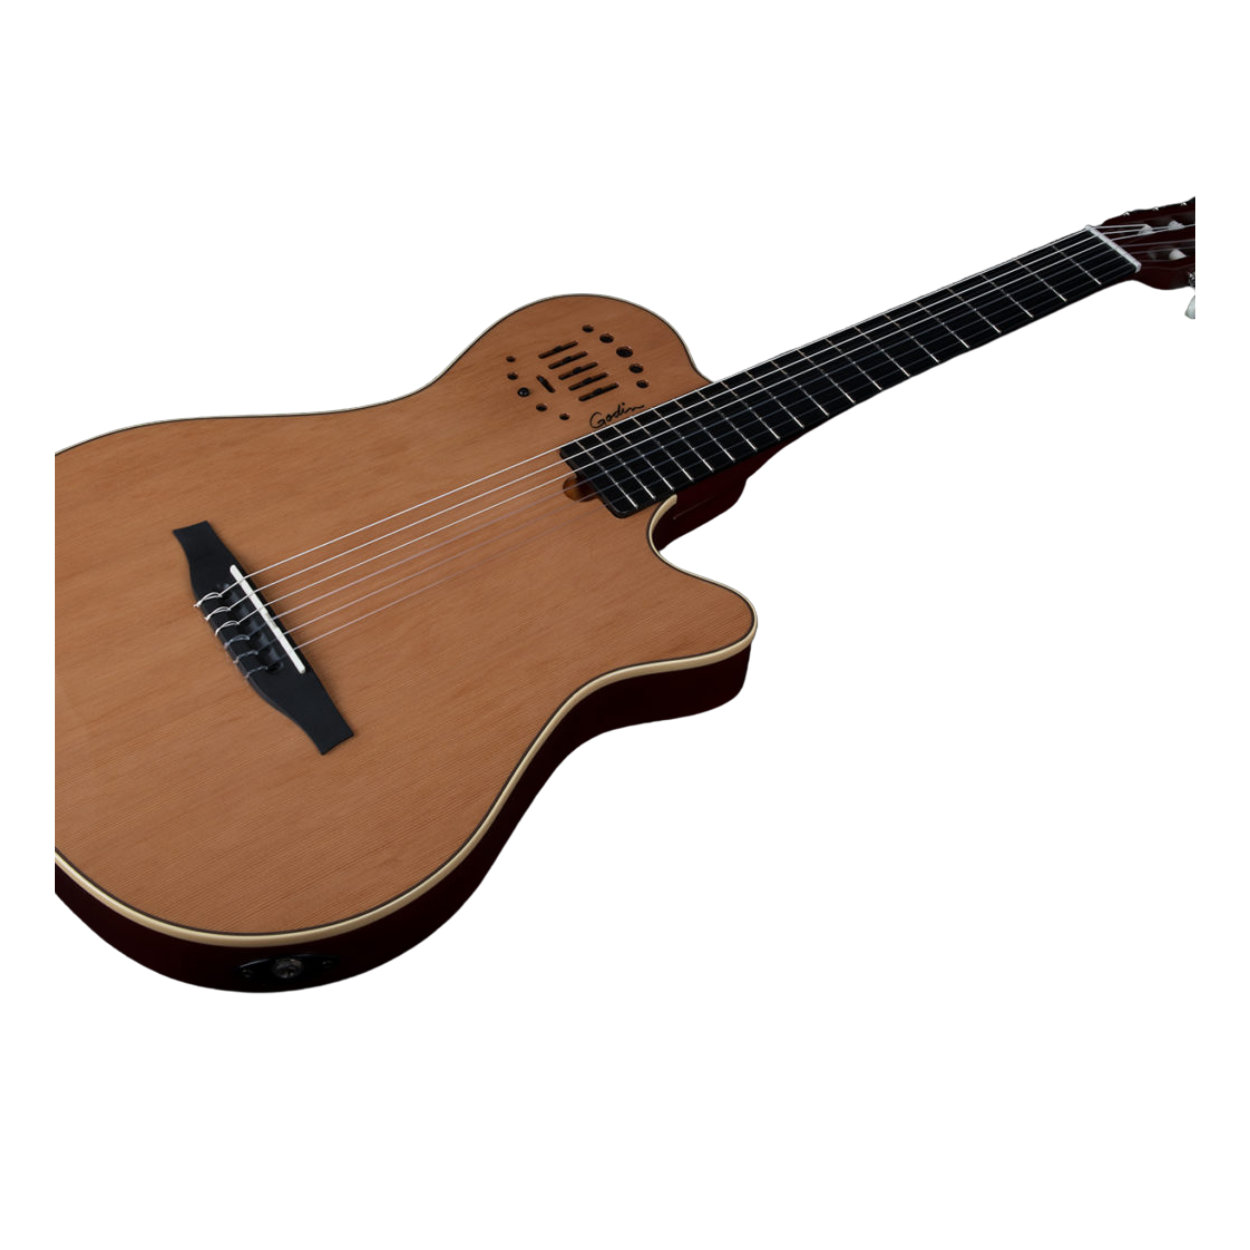 GODIN MULTIAC GRAND CONCERT DUET AMBIANCE NATURAL HG ELECTRIC CLASSICAL GUITAR WITH GIGBAG